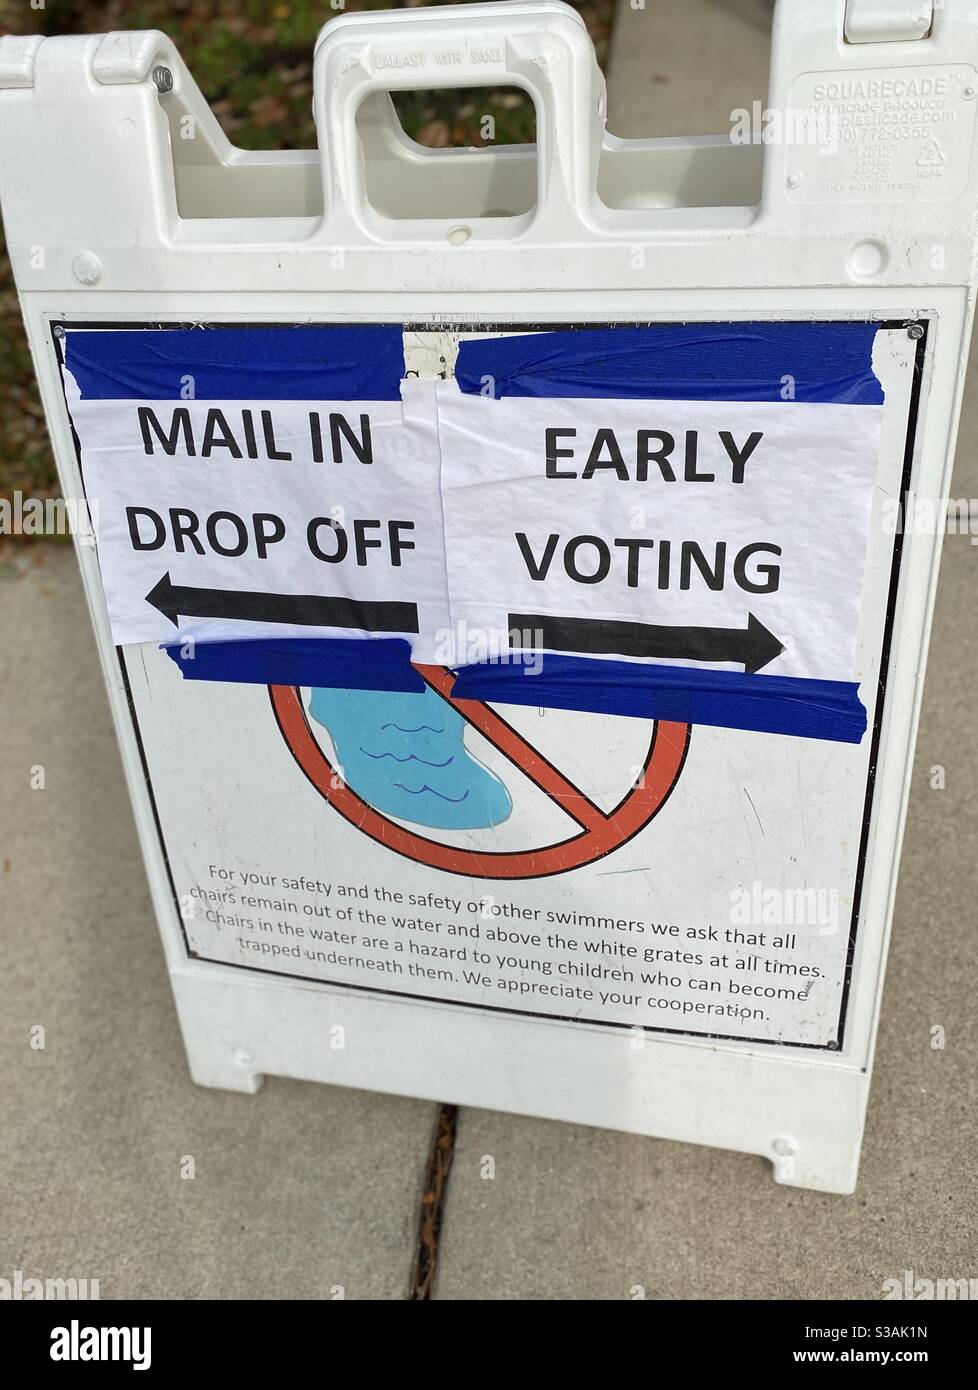 Polling place signage in Chicago suburbs shows voters where to drop off ballots and where to line up for early voting. Early voting lines extended down the block. Stock Photo